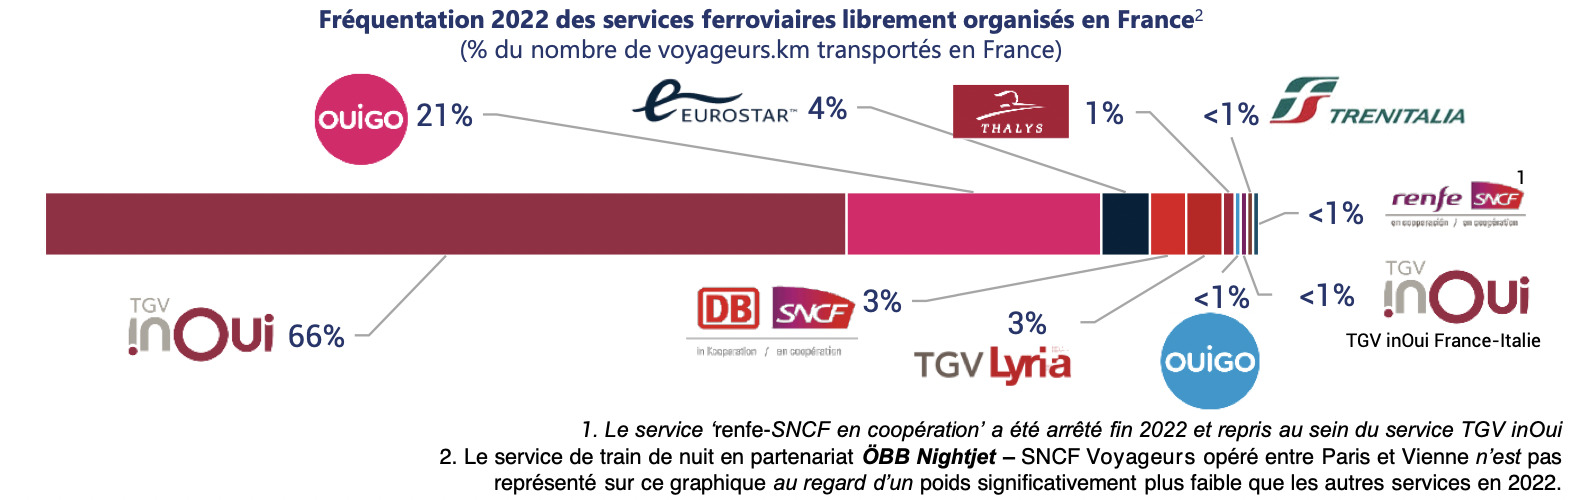 Frequentation of freely organised rail services in France in 2022